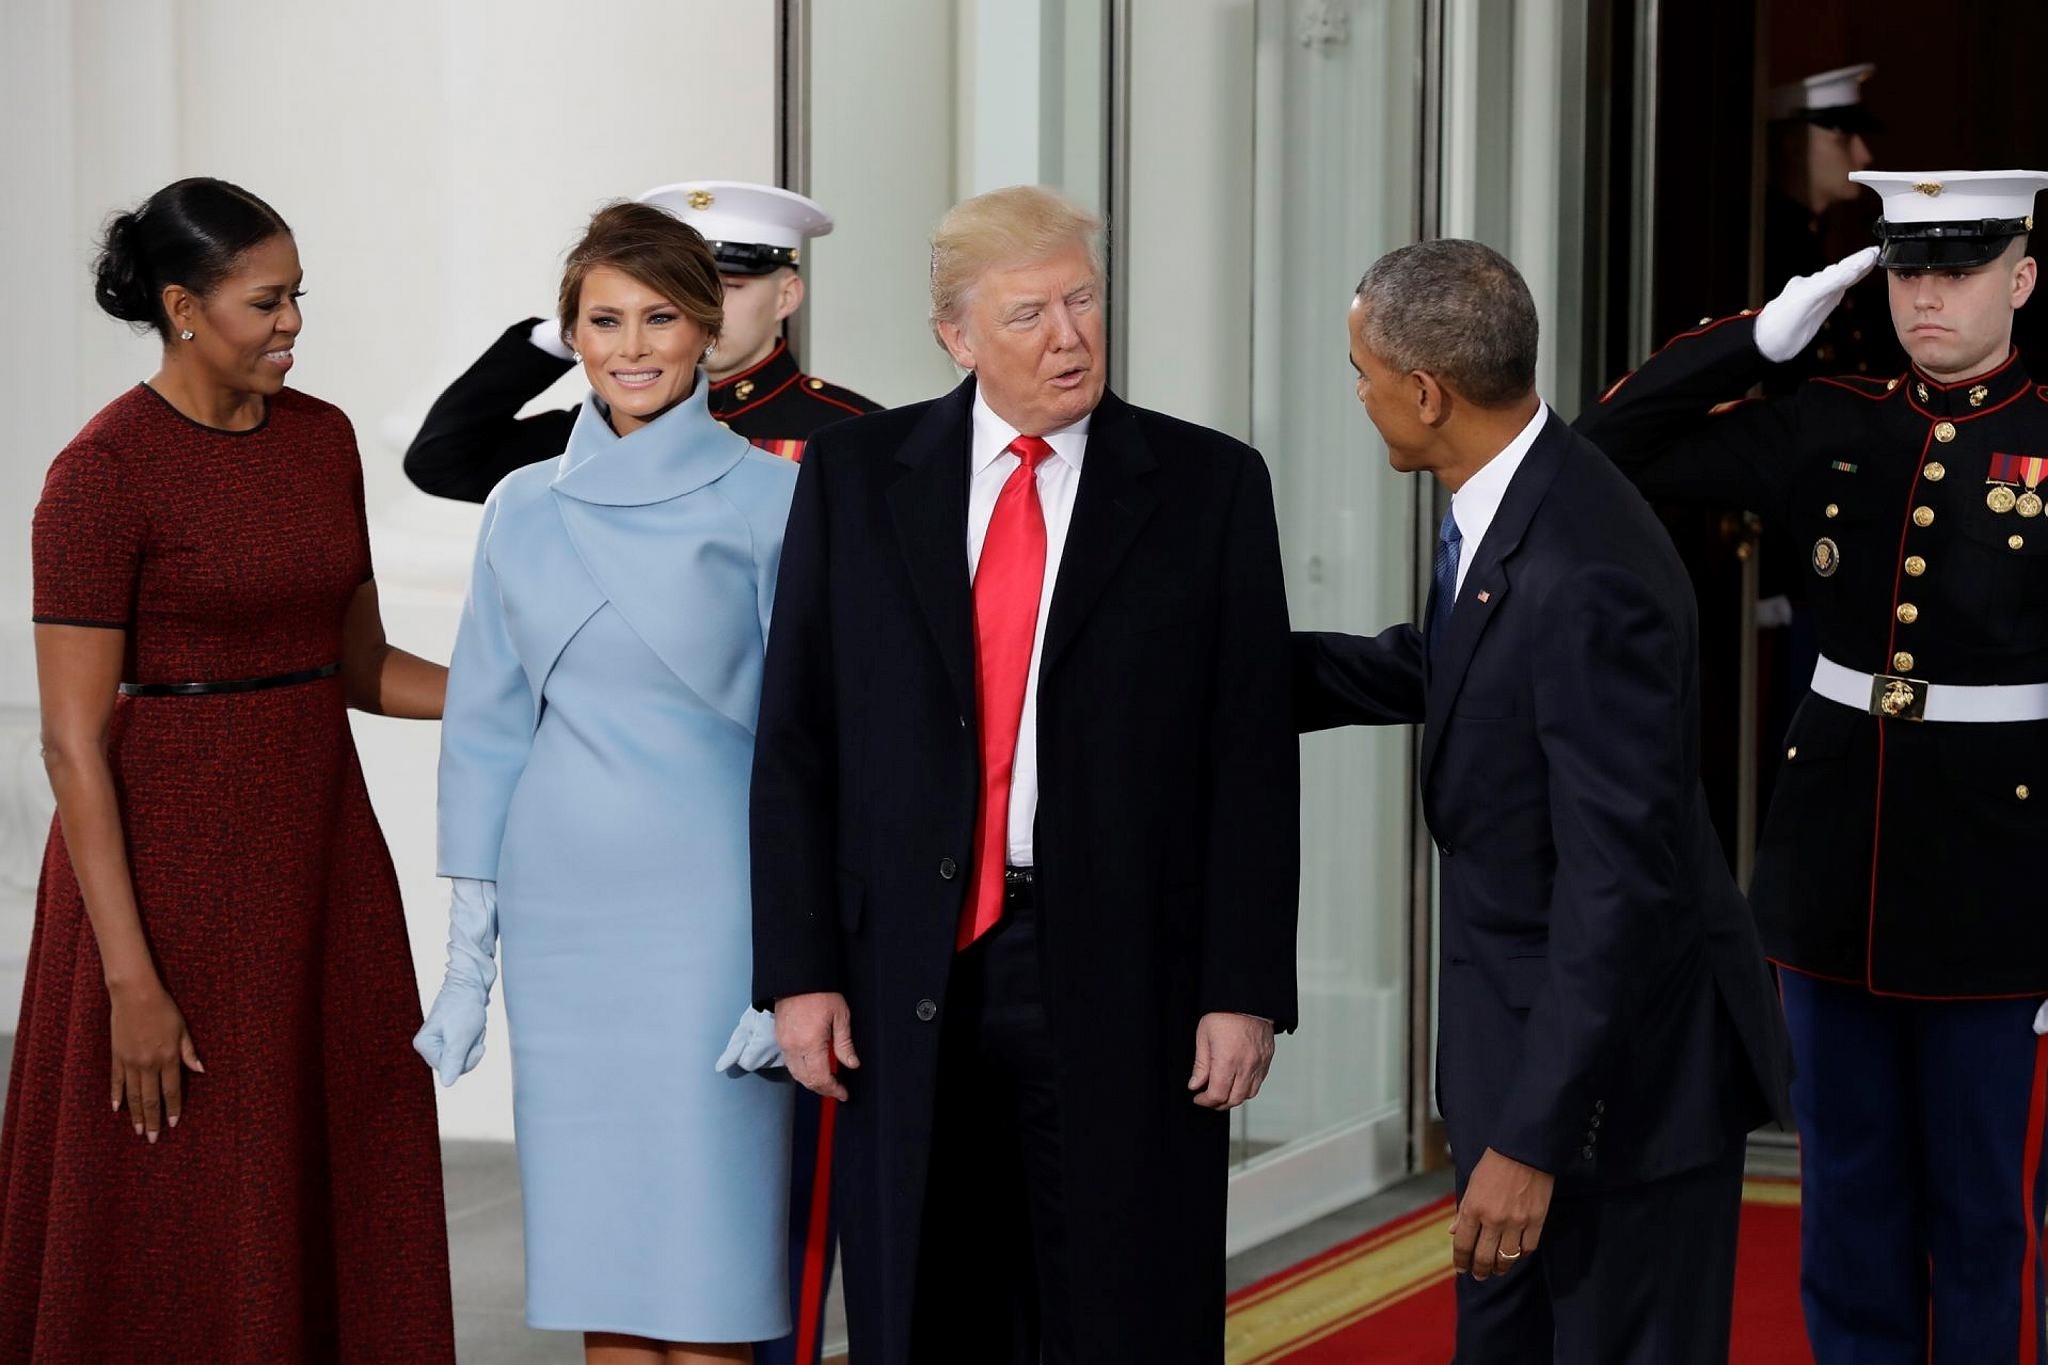 President Barack Obama and first lady Michelle Obama greet President-elect Donald Trump and his wife Melania at the White House in Washington, Friday, Jan. 20, 2017. (AP Photo)